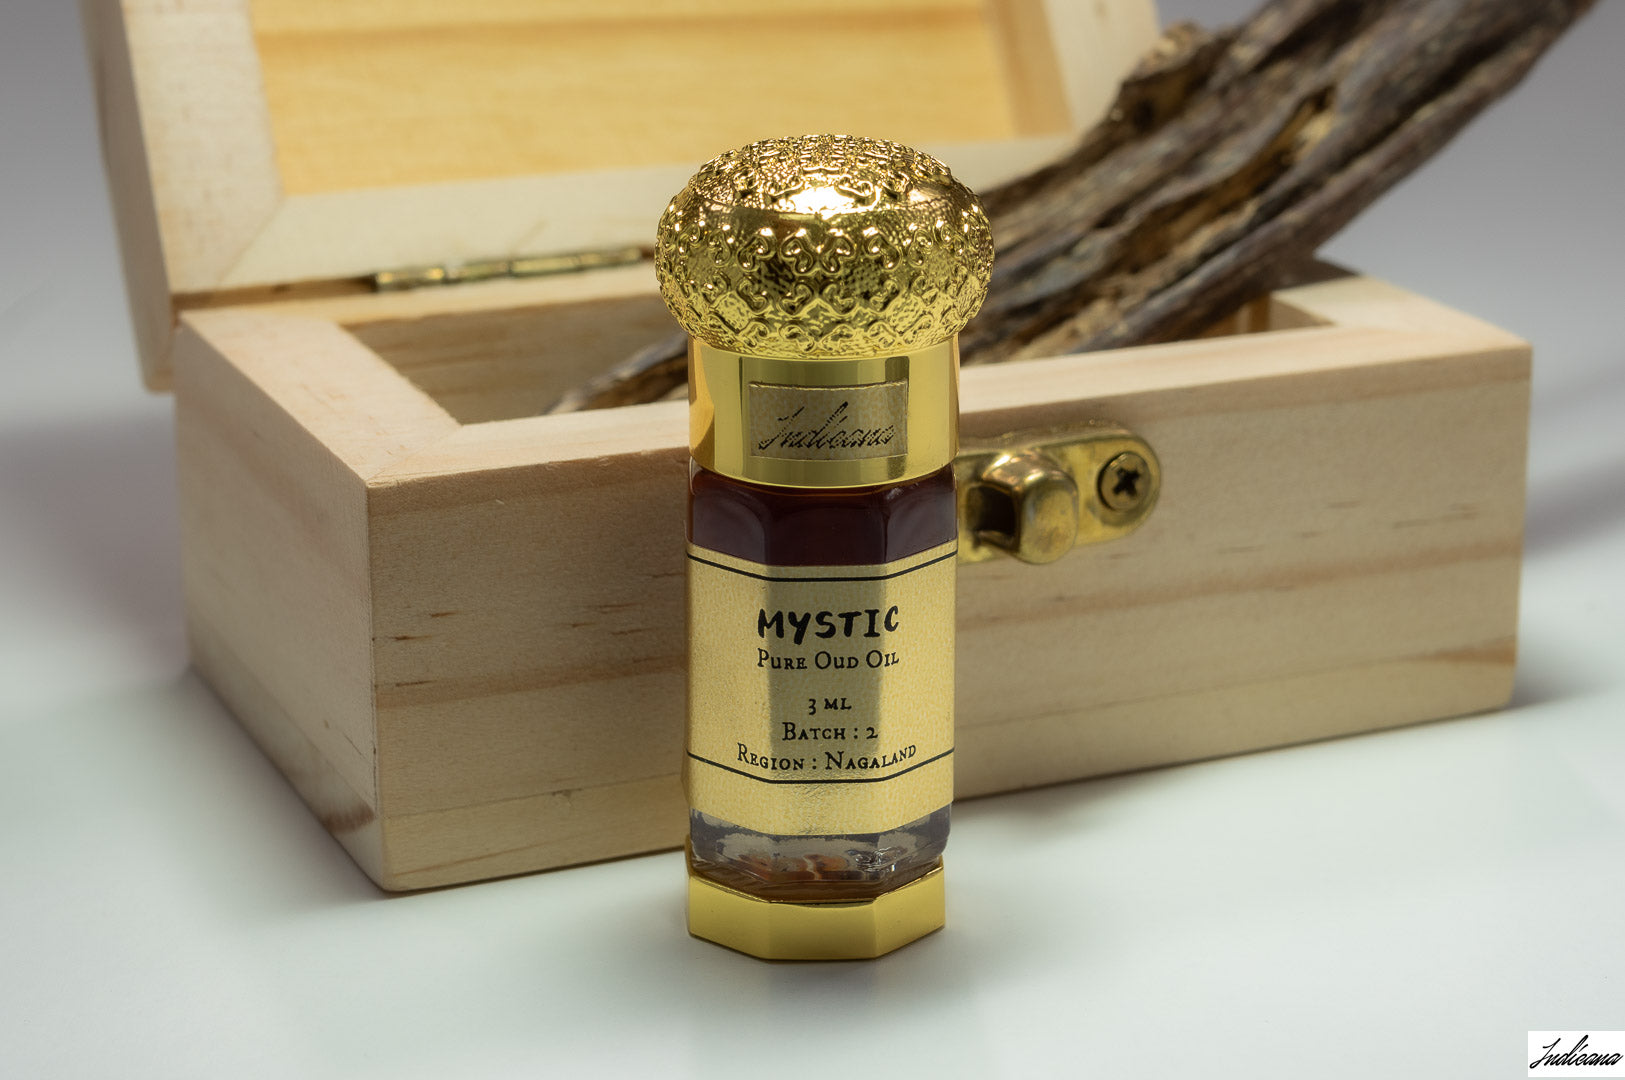 Mystic Pure Oud Oil by Indicana Oud